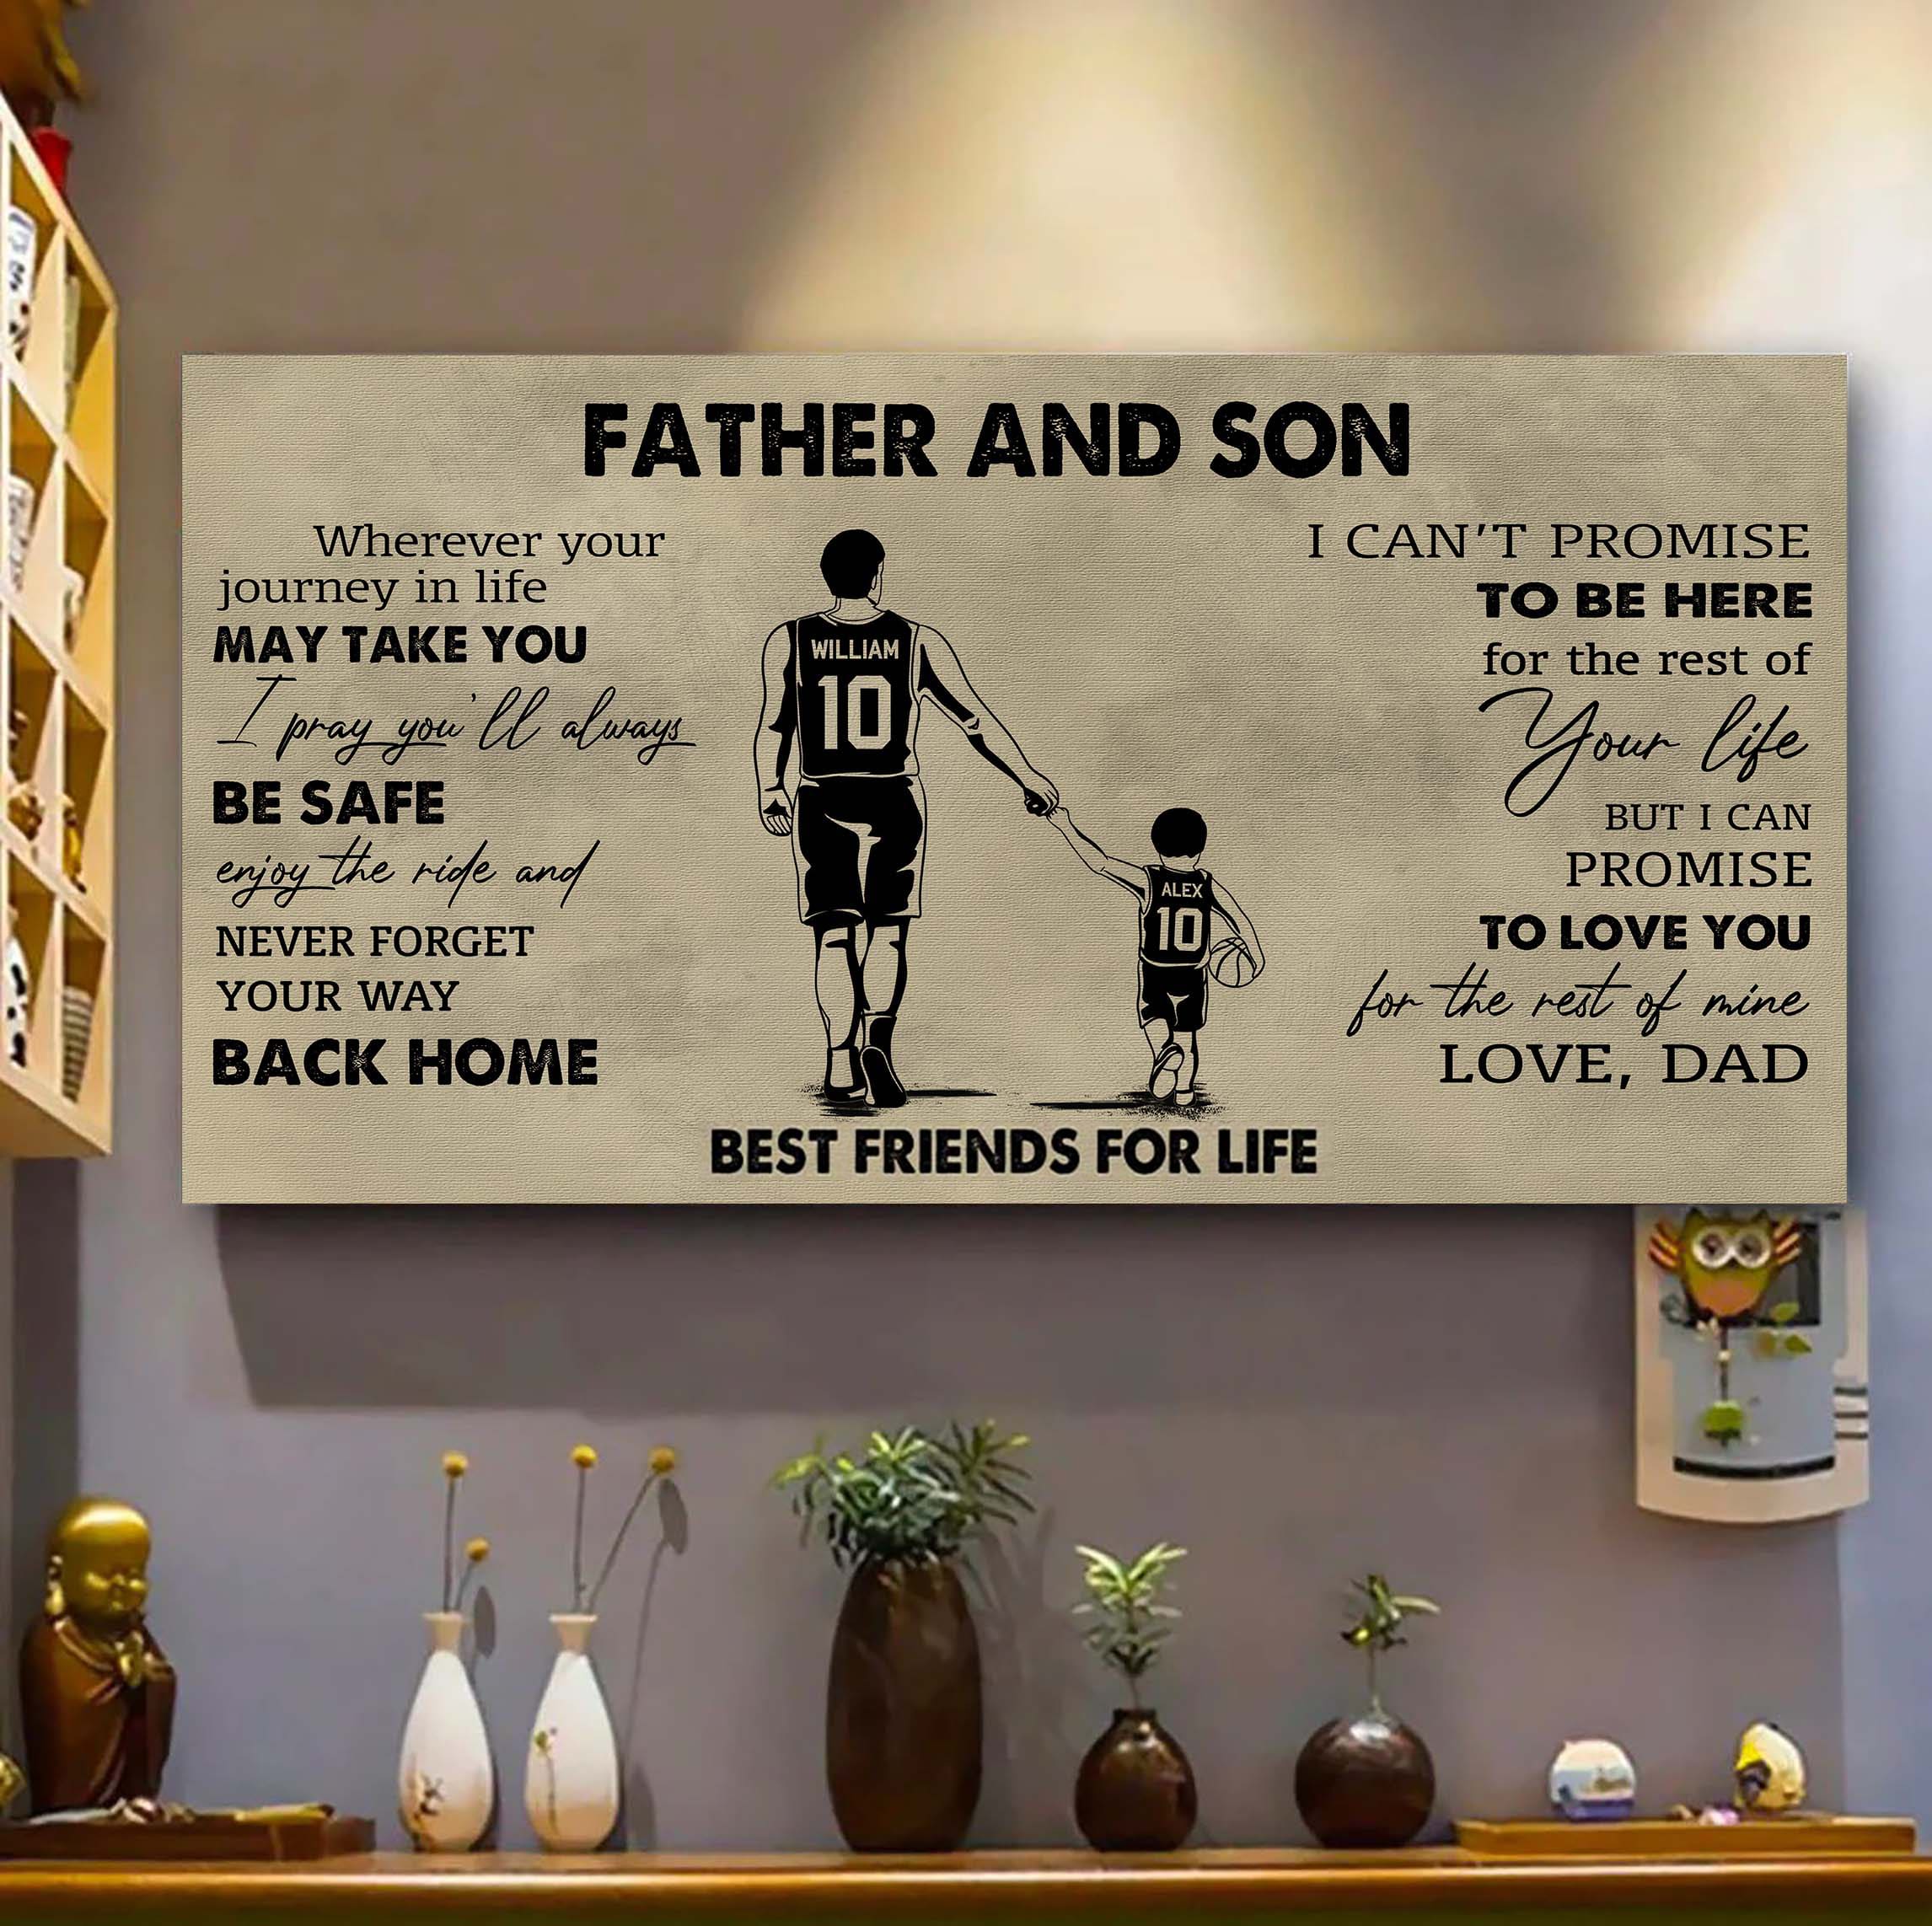 Family Father And Son Best Friends For Life - Never Forget Your Way Back Home Poster Canvas Gift For Son From Father